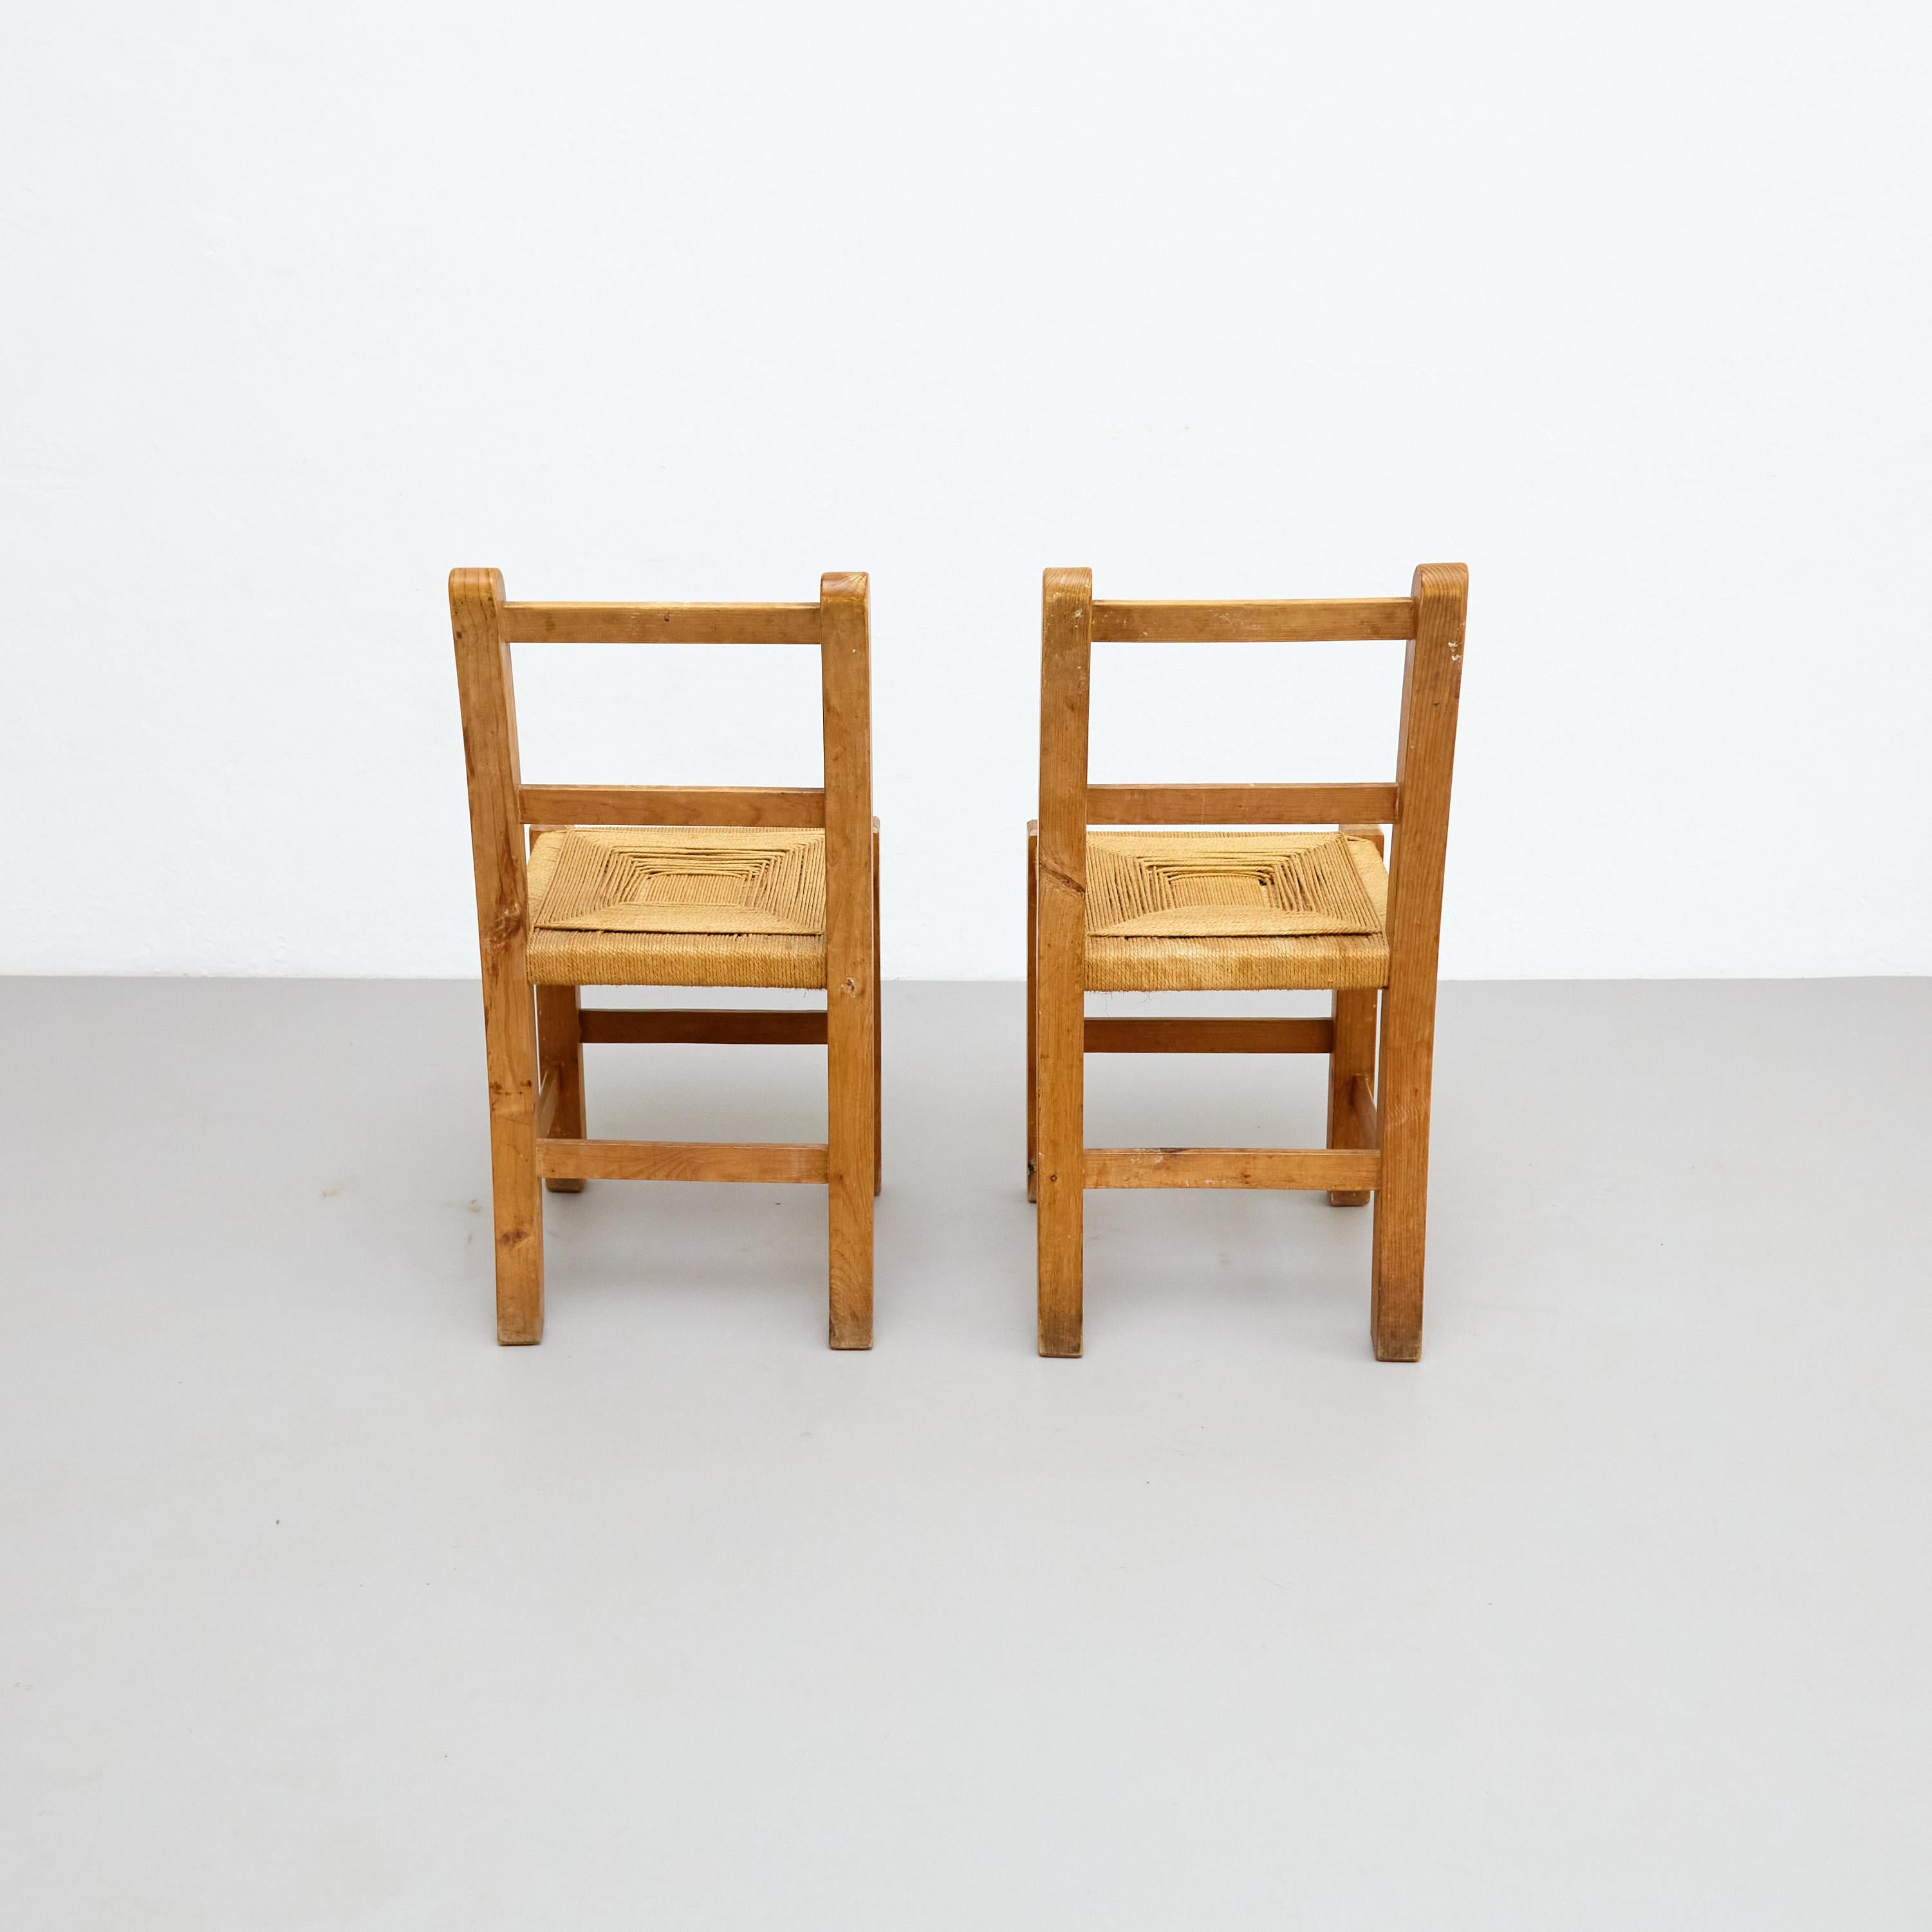 Pair of Mid-Century Modern Wood and Rattan French Rationalist Chairs, circa 1950 For Sale 2